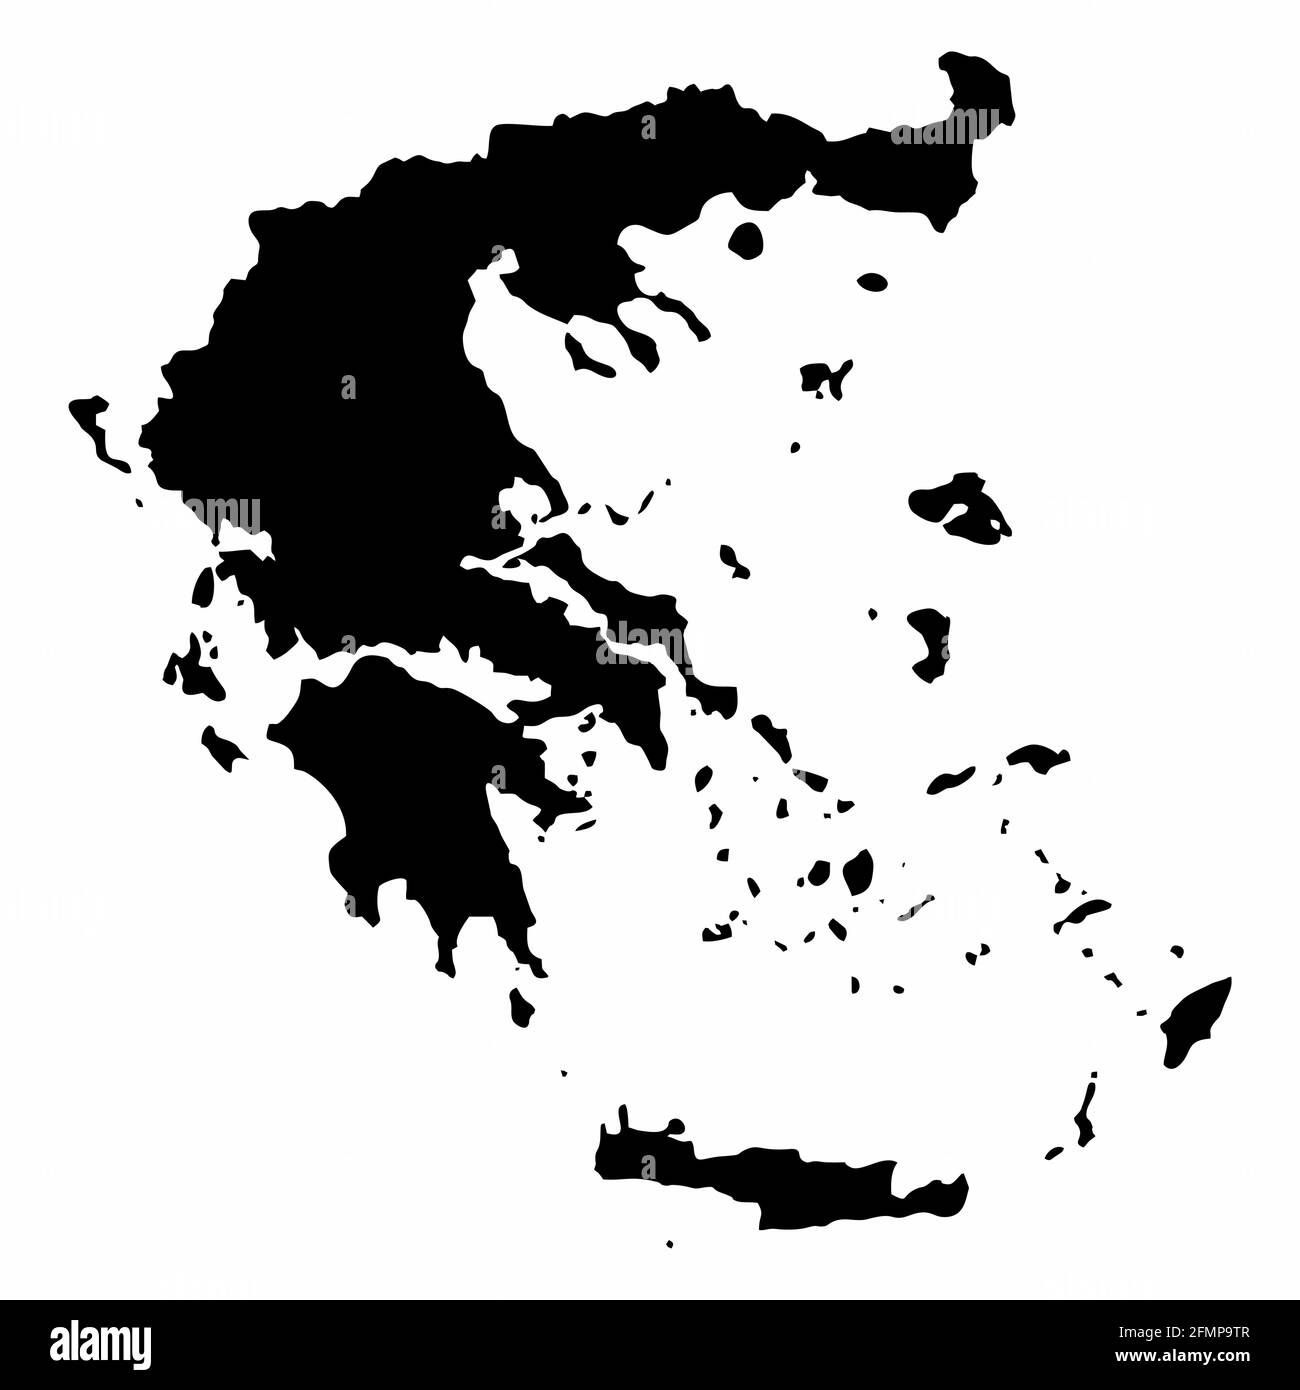 Greece dark silhouette map isolated on white background Stock Vector